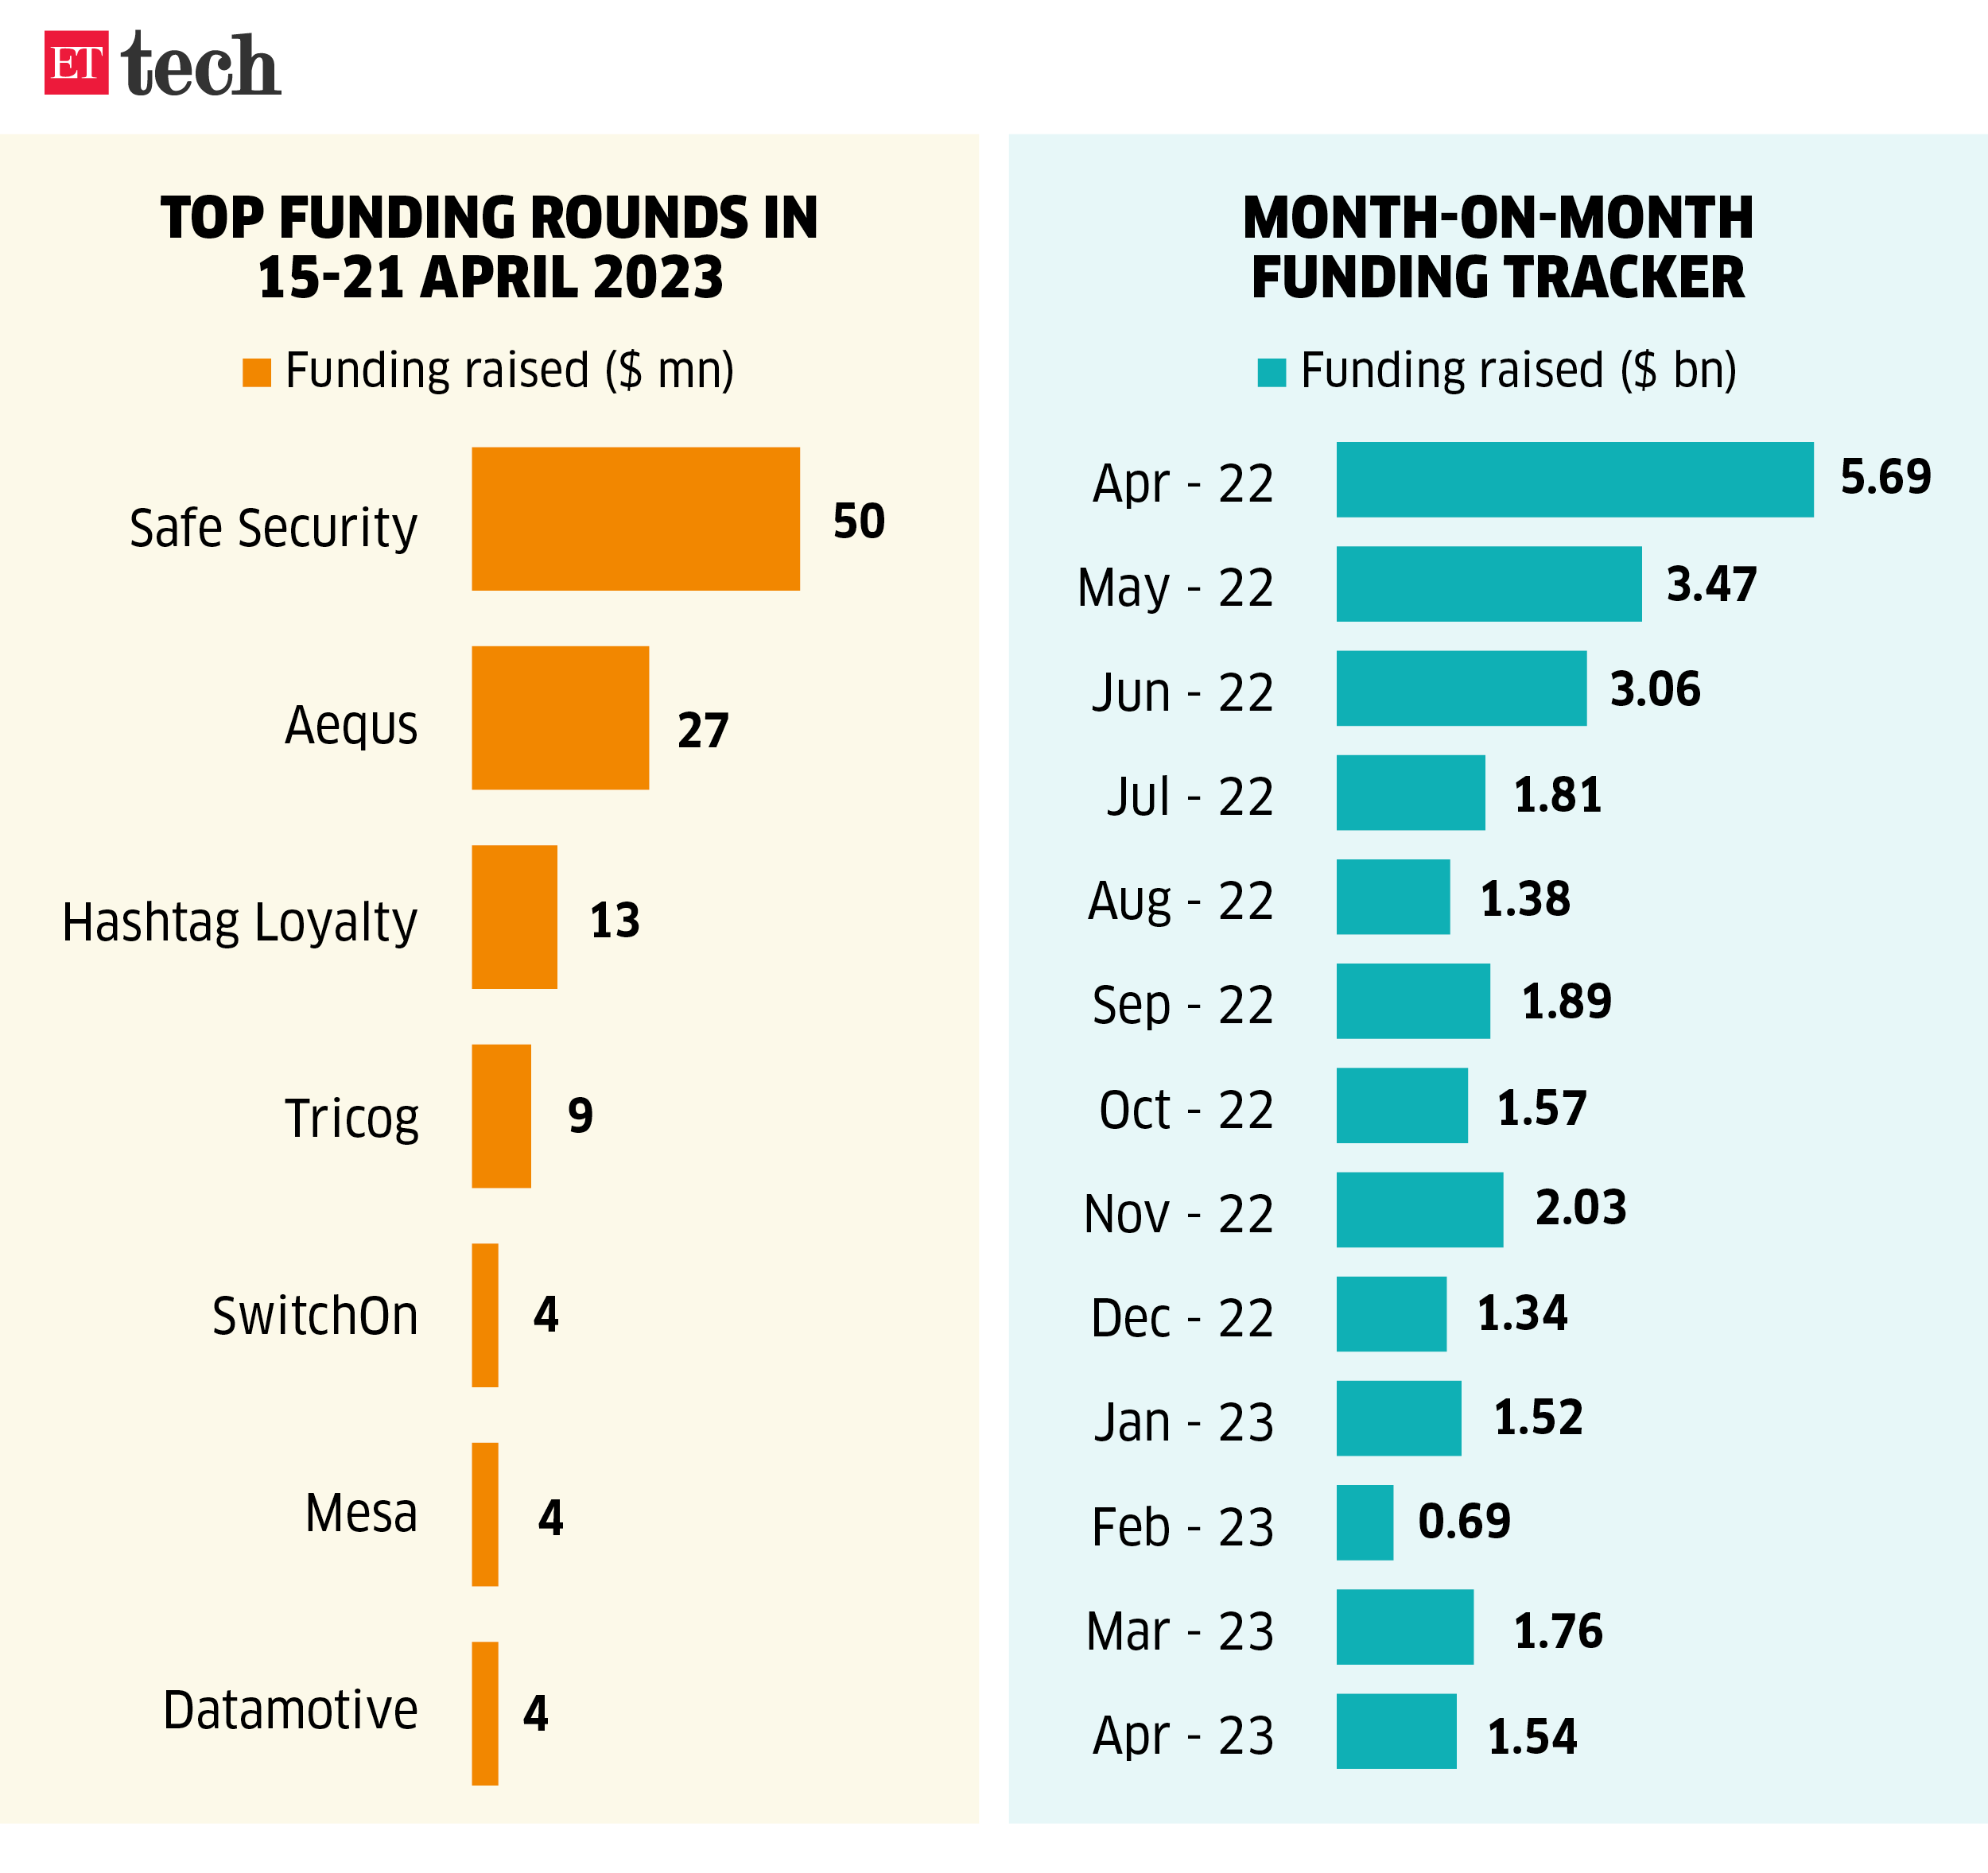 Top funding rounds in 21 april 2023